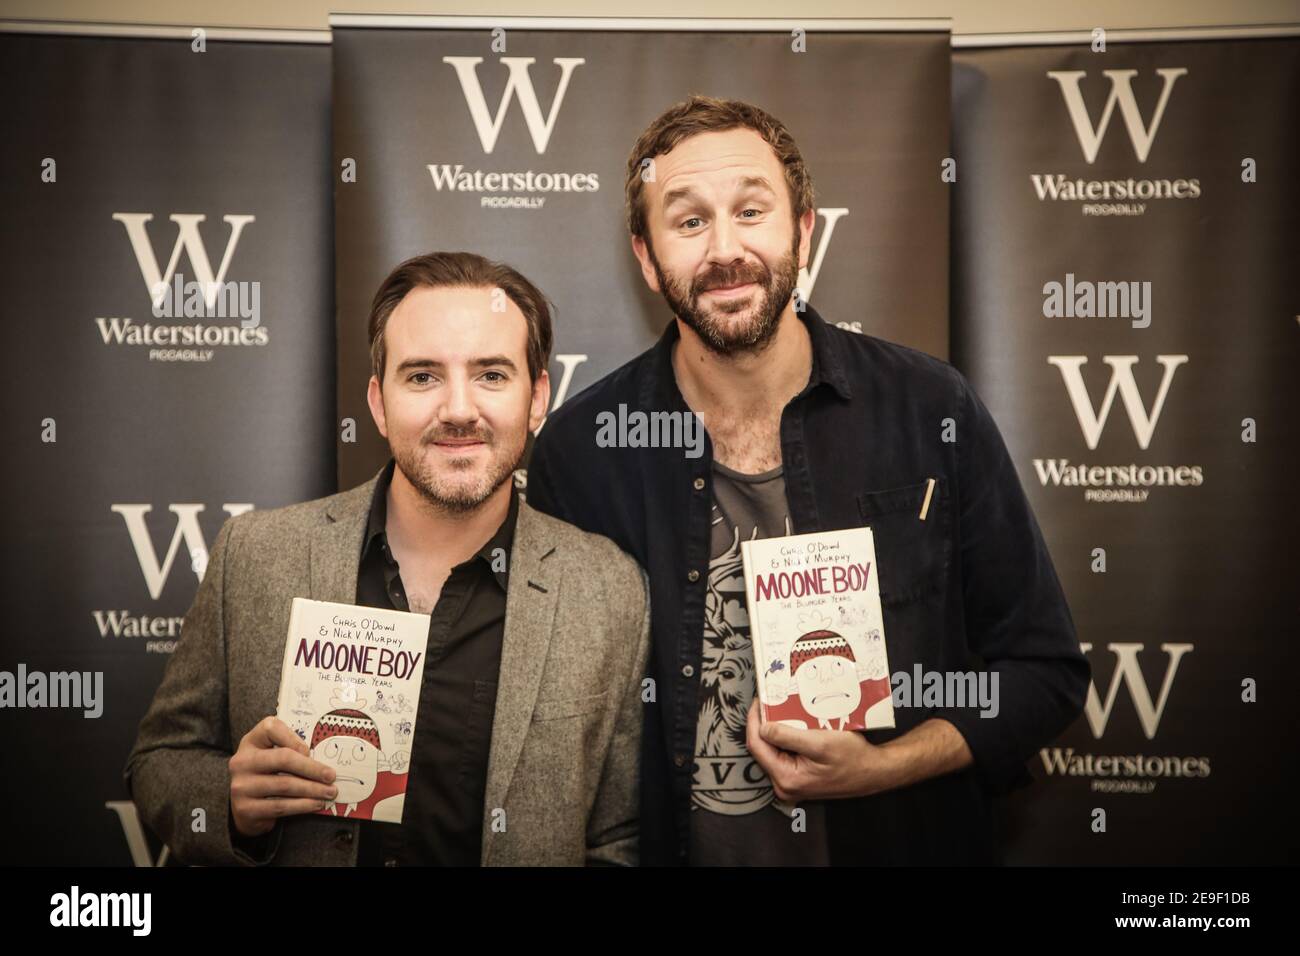 Chris O'Dowd (right) and Nick Murphy (left) pose for photos at Waterstones in Piccadilly London before talking about their new jointly-written book Mo Stock Photo